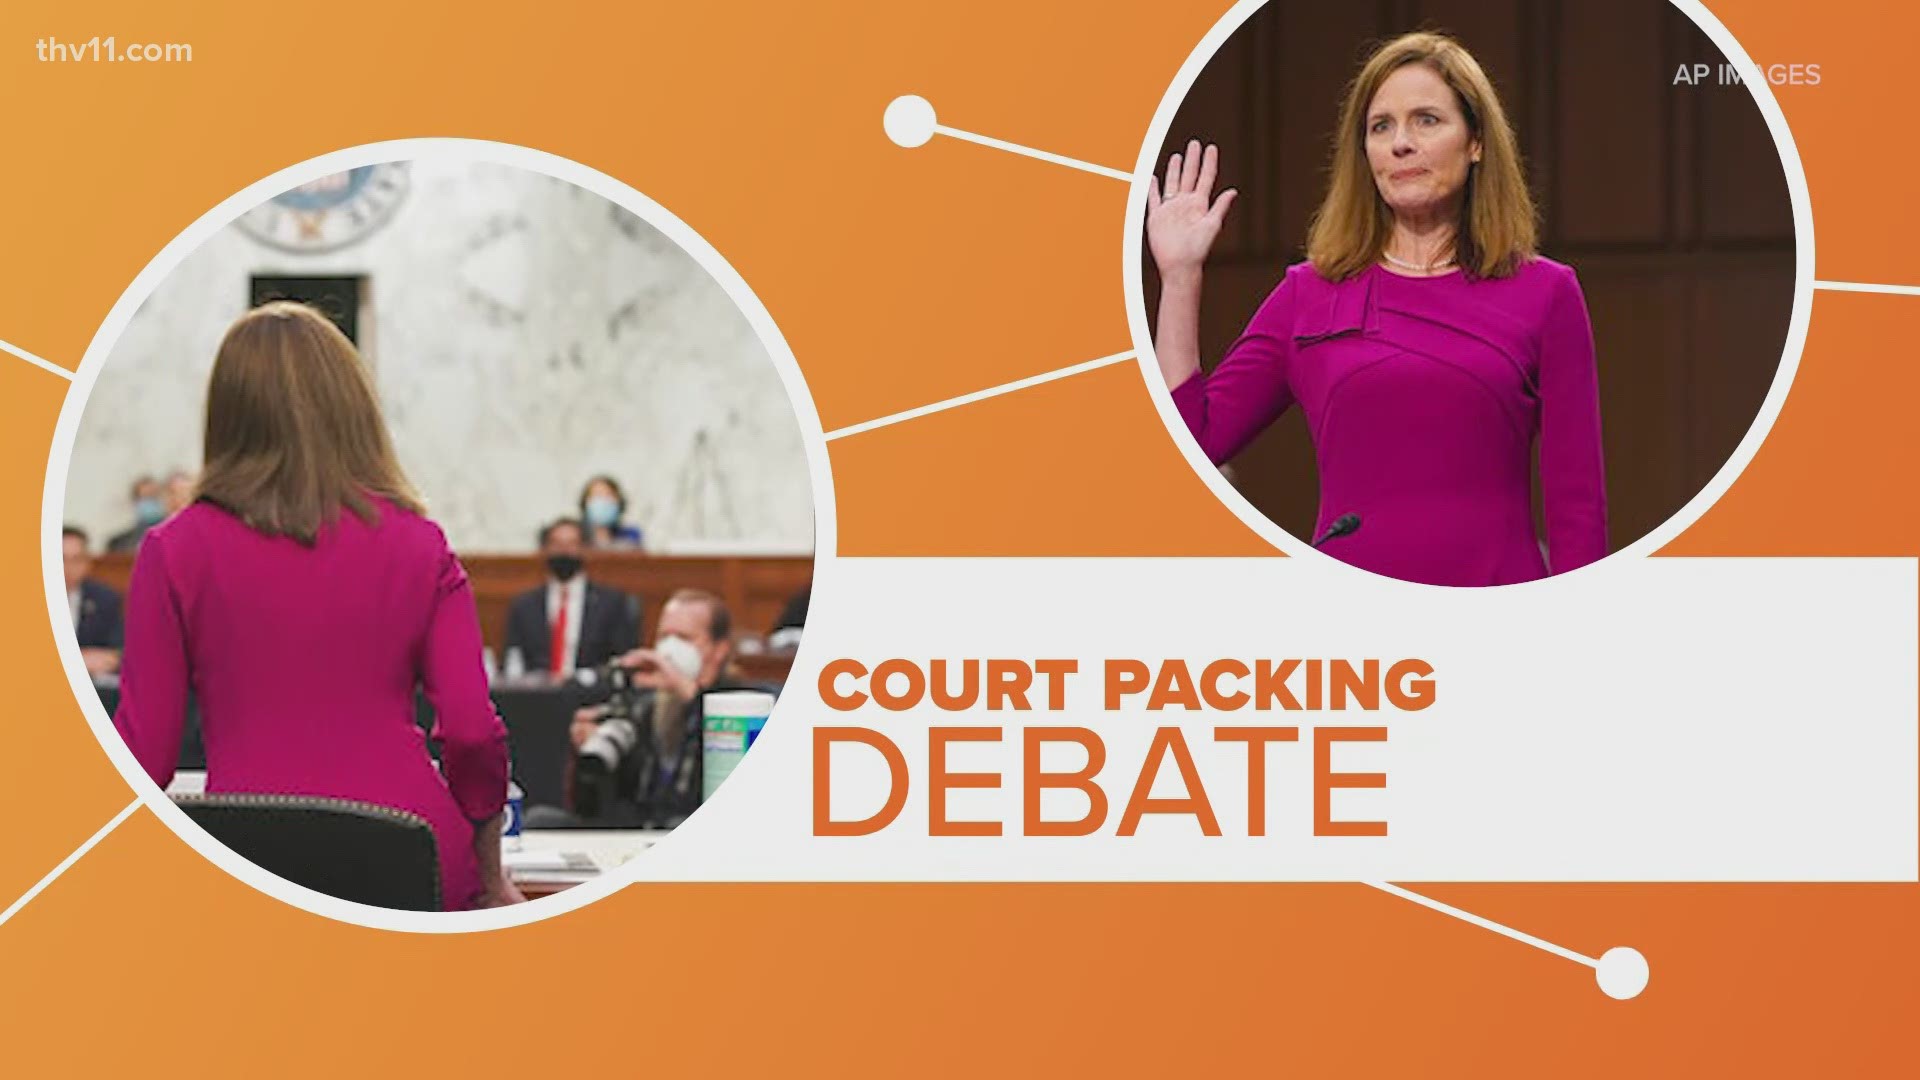 You've probably heard the term "court packing" lately. Both republicans and democrats accuse the other of using the tactic to shift political power.